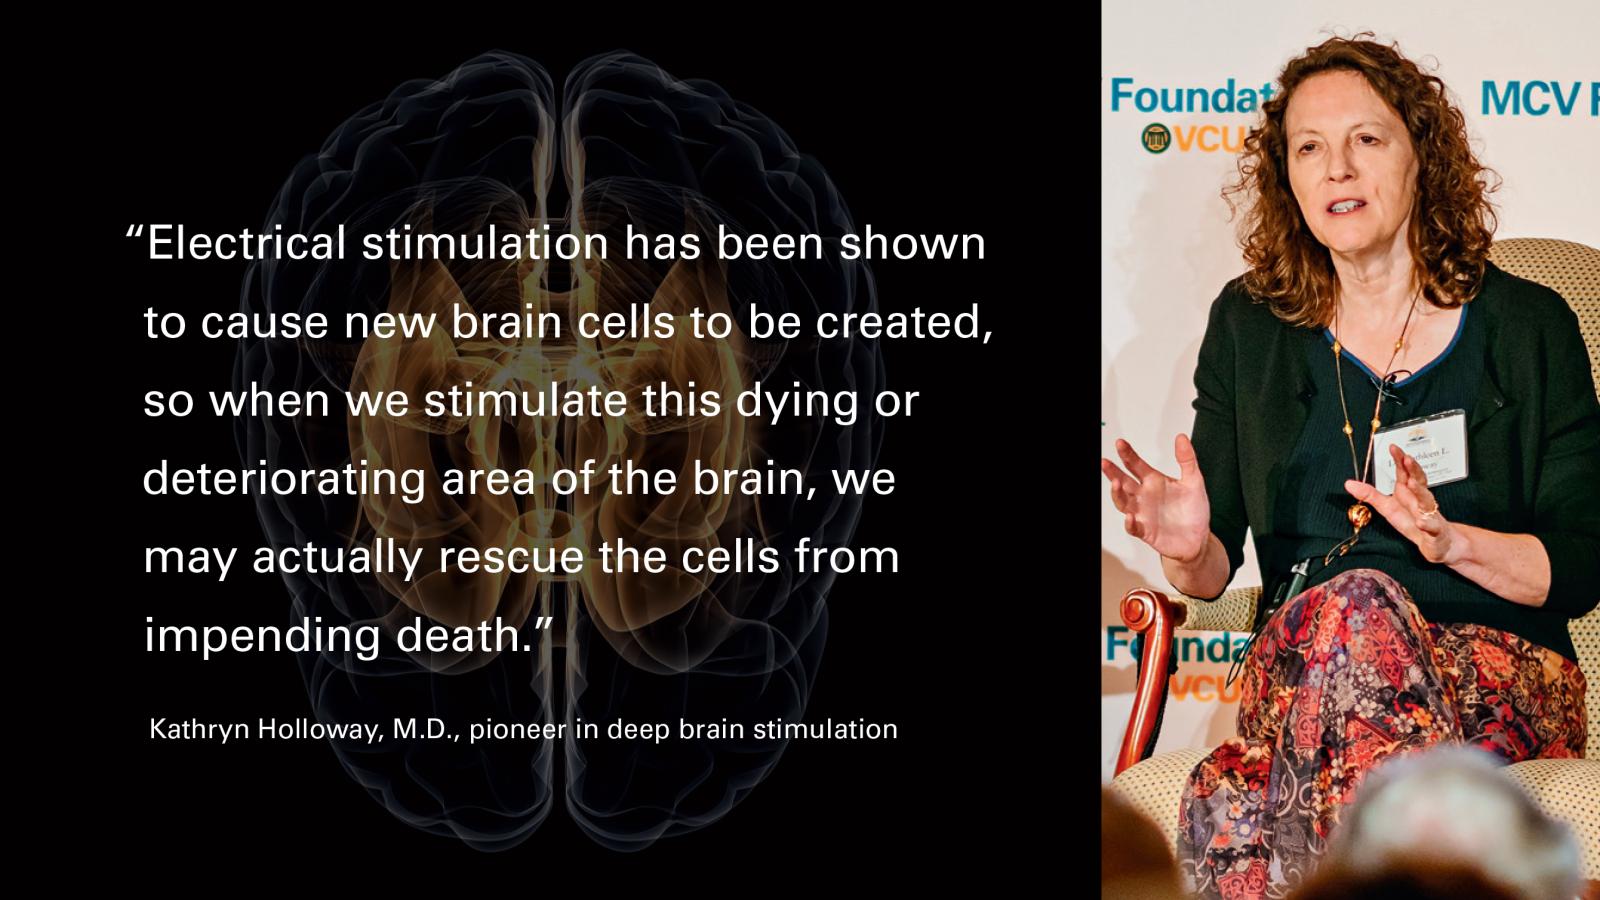 Dr. Holloway: Electical stimulation has been shown to cause new brain cells to be created.